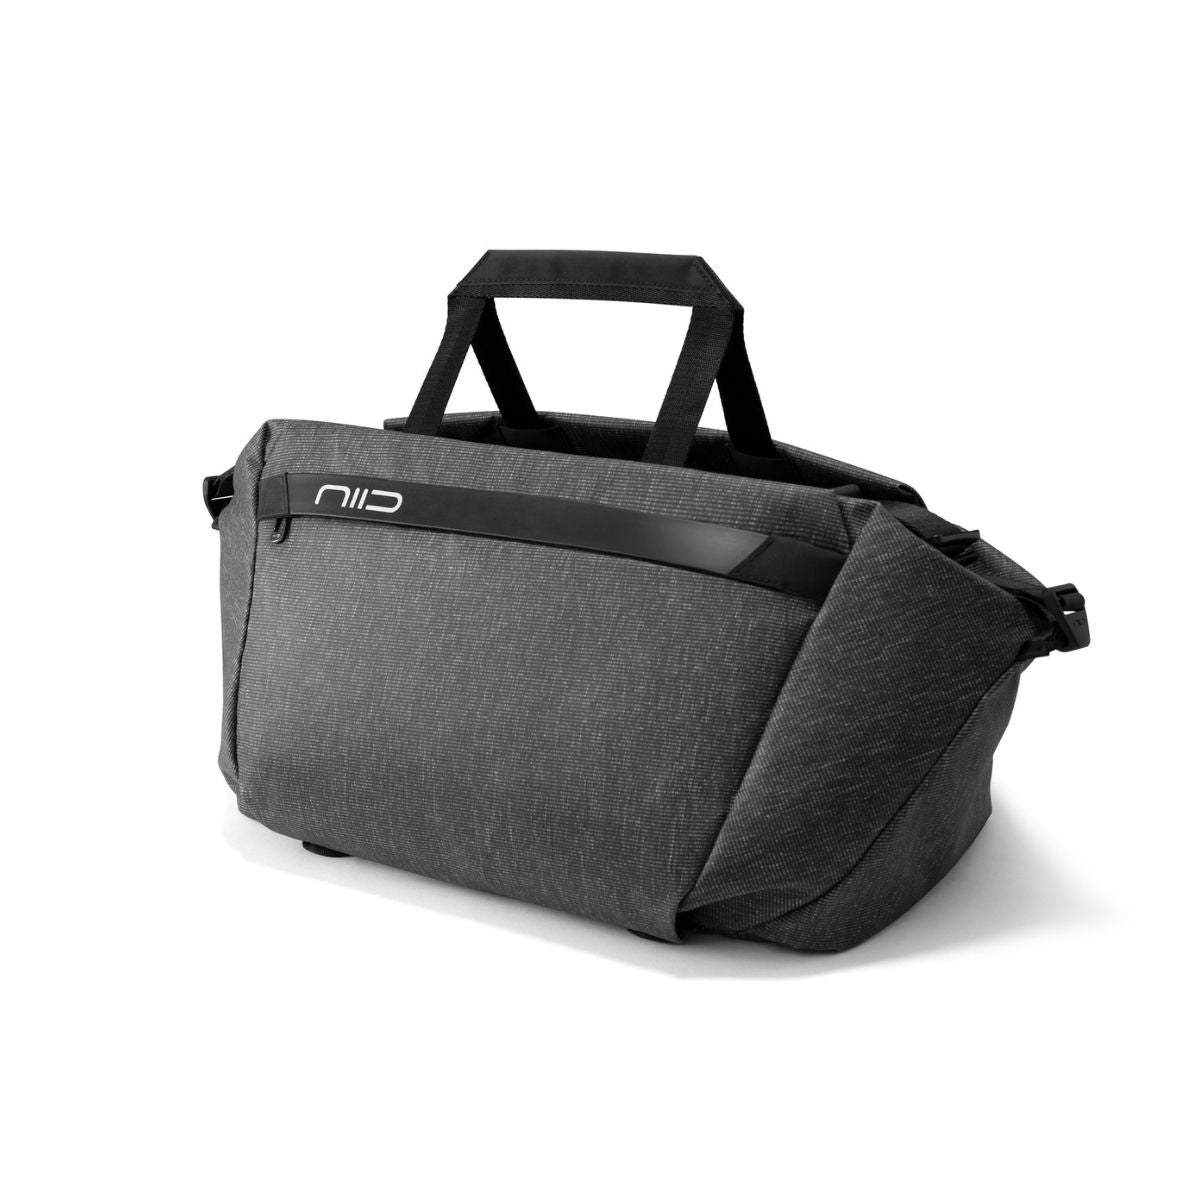 NIID CACHE Hybrid Sling and Duffle w/ Add-ons Accessories